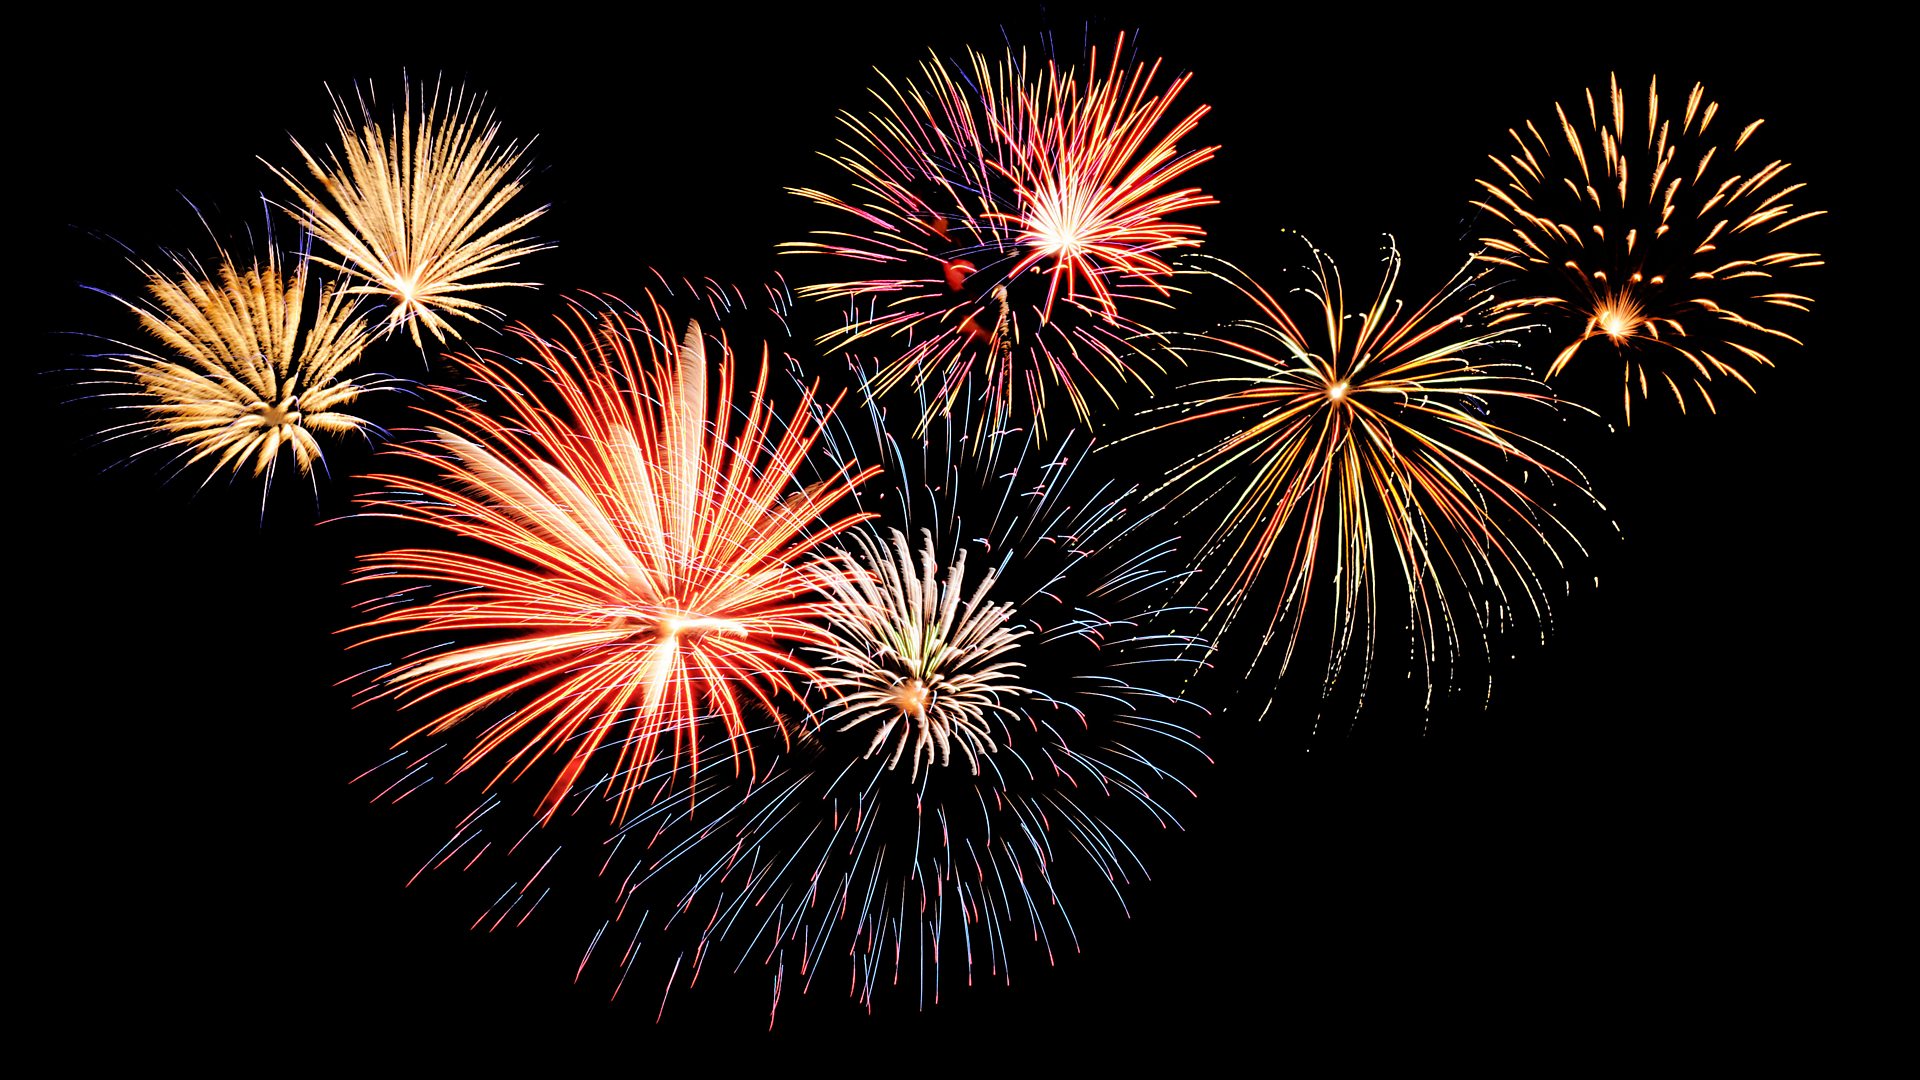 BBC Radio 4 - Radio 4 in Four - Eight fizzling facts about fireworks